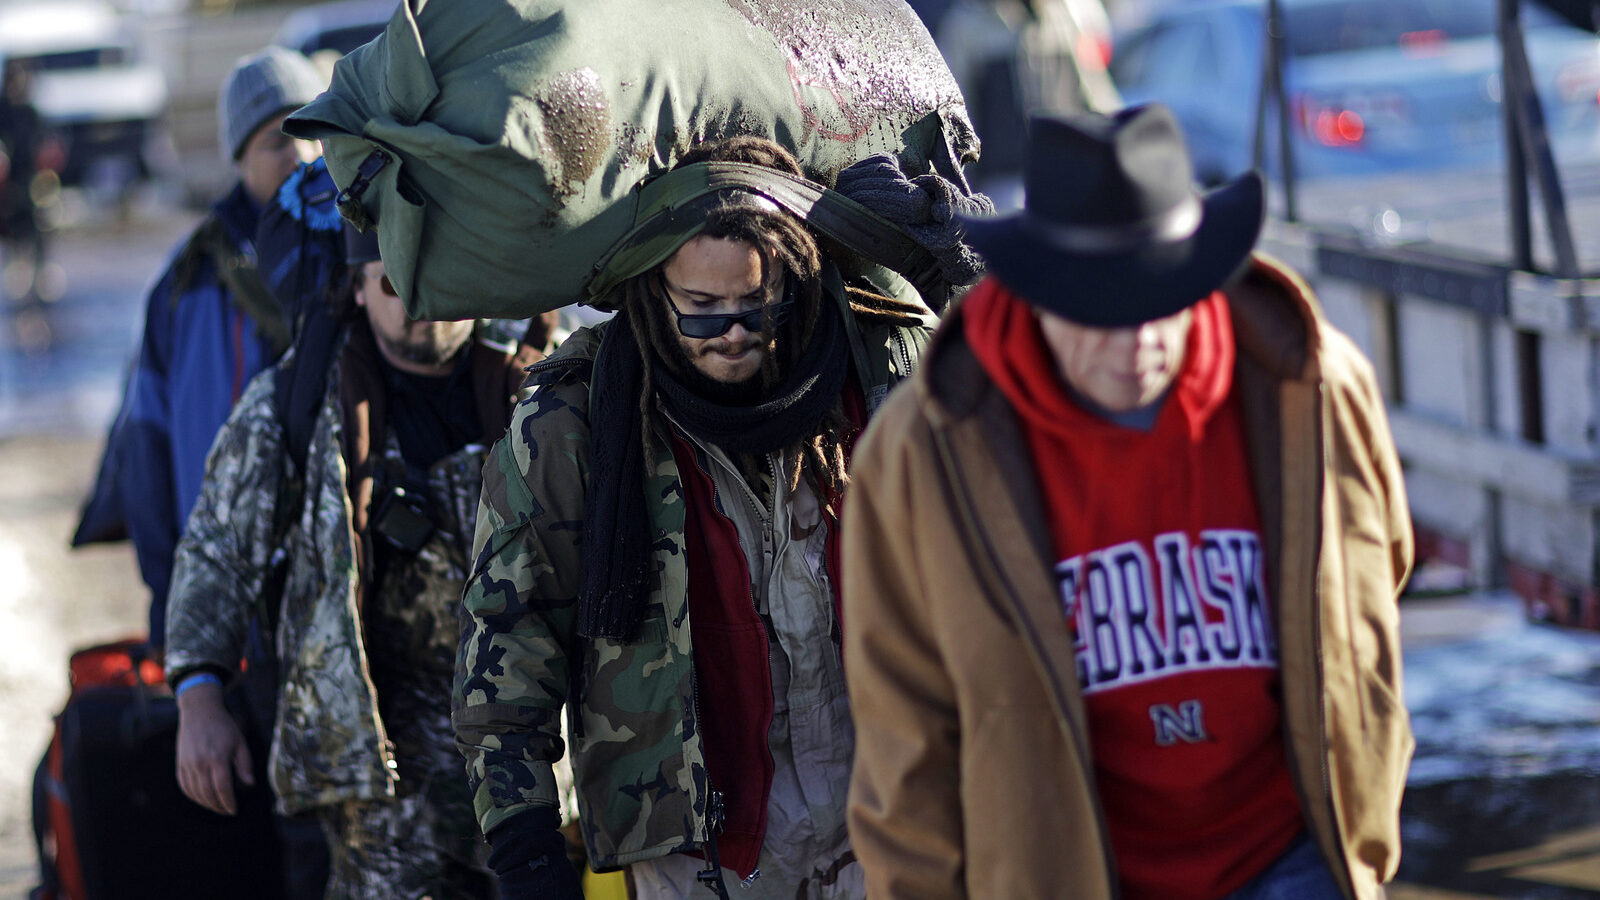 Marine Corps veteran Nesky Hernandez, center, carries his pack after arriving with fellow veterans at the Oceti Sakowin camp where people have gathered to protest the Dakota Access oil pipeline in Cannon Ball, N.D., Sunday, Dec. 4, 2016. Tribal elders have asked the military veterans joining the large Dakota Access pipeline protest encampment not to have confrontations with law enforcement officials, an organizer with Veterans Stand for Standing Rock said Sunday, adding the group is there to help out those who've dug in against the four-state, $3.8 billion project. (AP Photo/David Goldman)